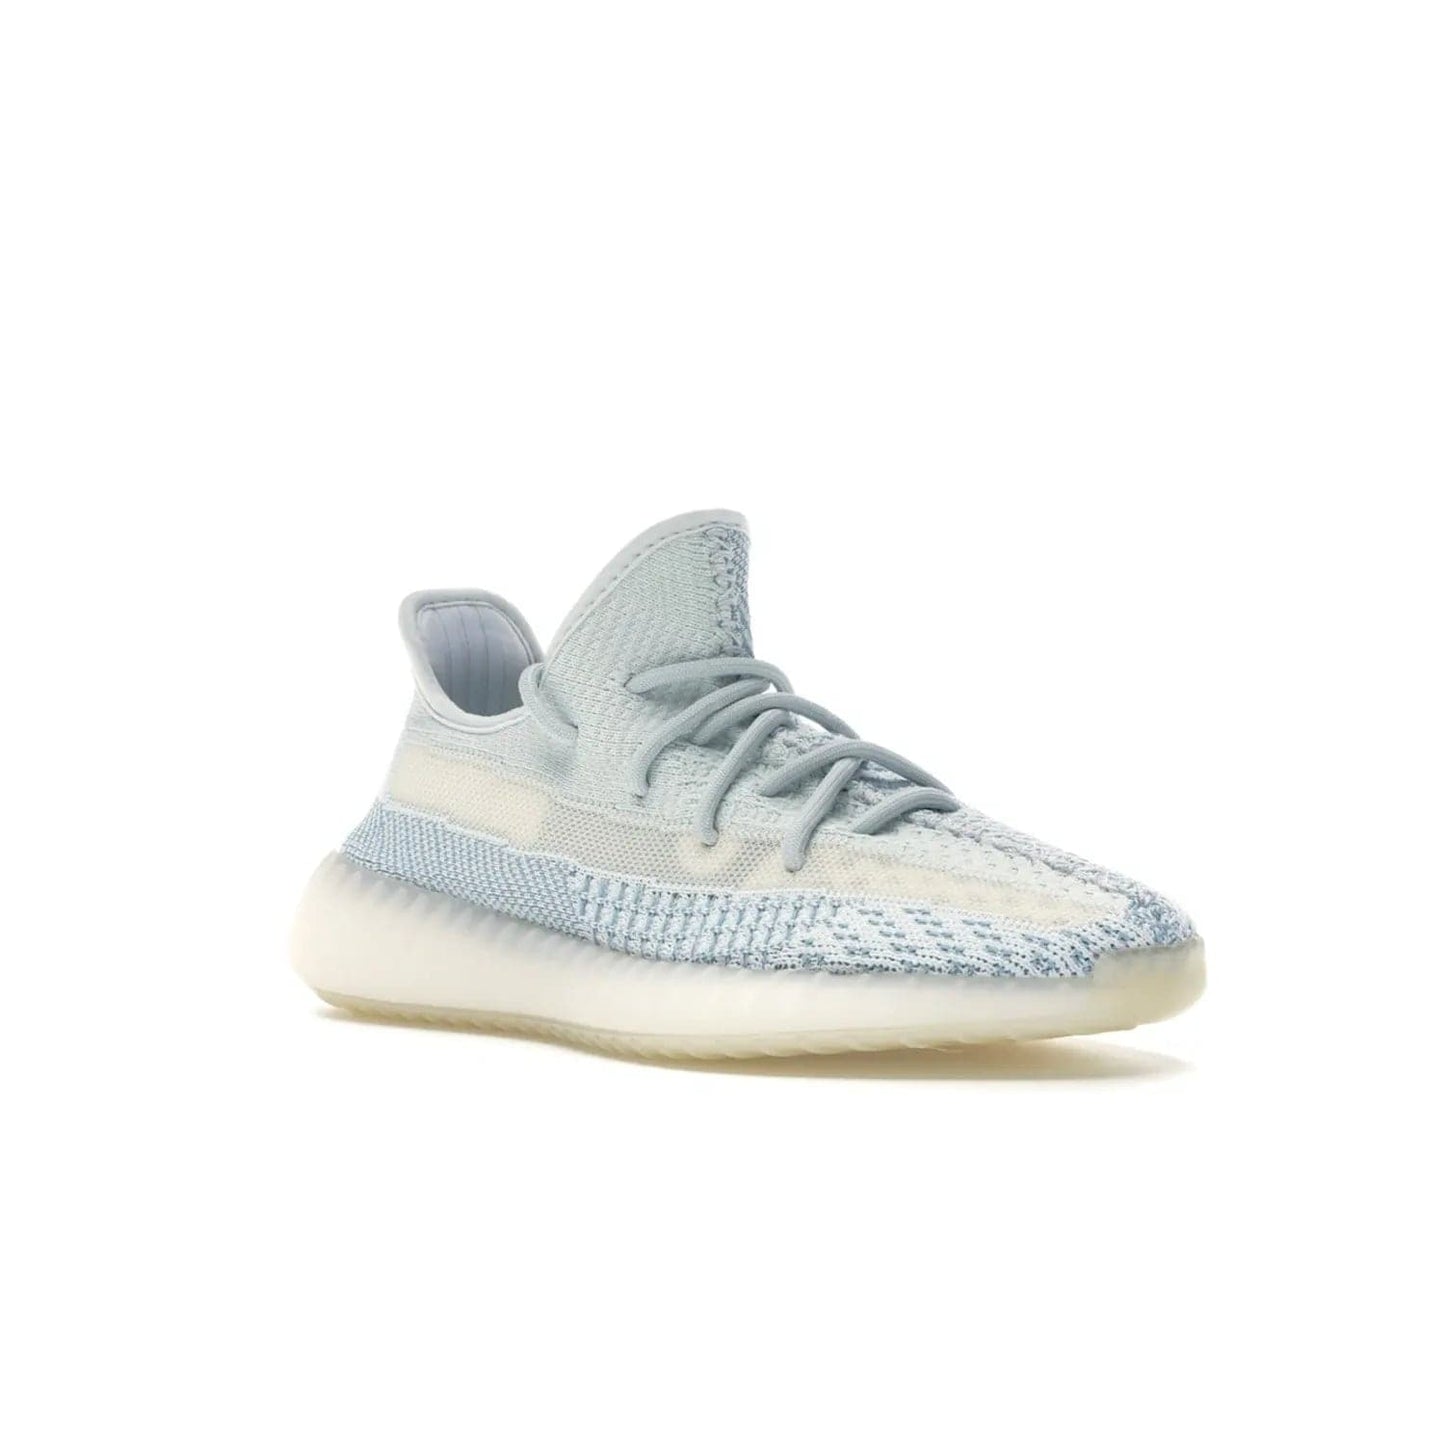 adidas Yeezy Boost 350 V2 Cloud White (Non-Reflective) - Image 5 - Only at www.BallersClubKickz.com - Uniquely designed adidas Yeezy Boost 350 V2 Cloud White (Non-Reflective) with a Primeknit upper in shades of cream and blue with a contrasting hard sole. A fashion-forward sneaker with a transparent strip and blue-and-white patterns.